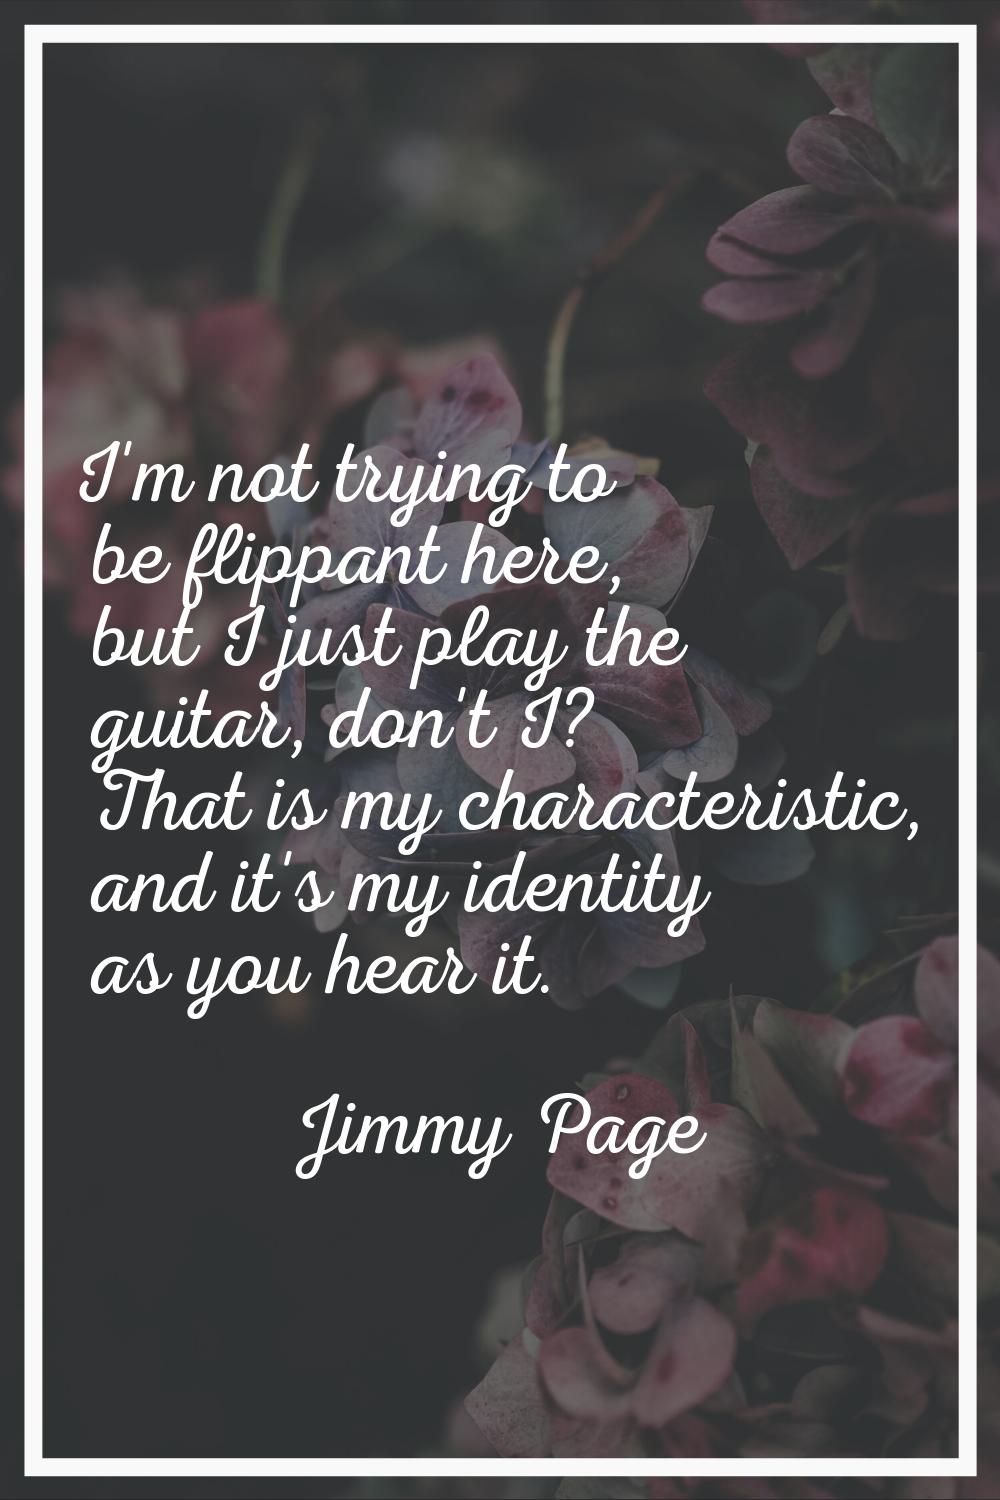 I'm not trying to be flippant here, but I just play the guitar, don't I? That is my characteristic,